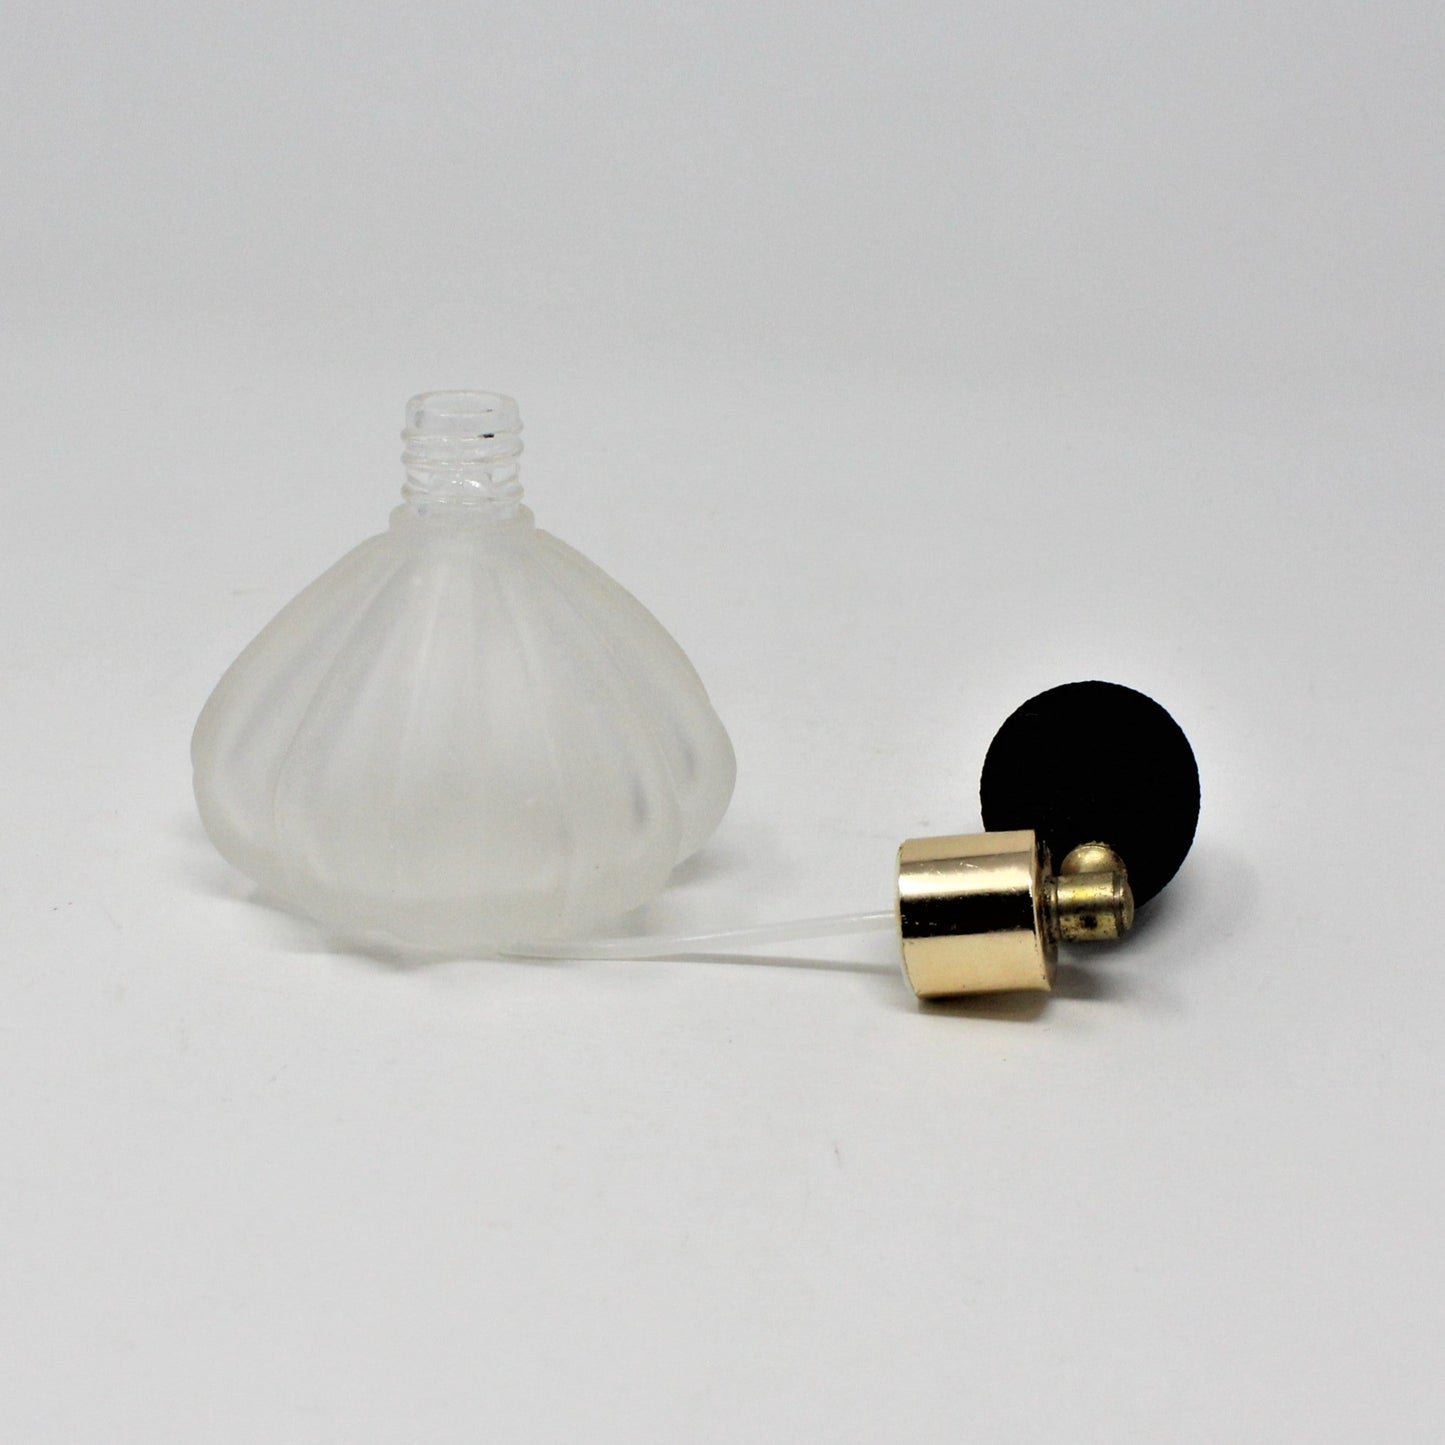 Perfume Bottle, Frosted Glass with Atomizer Bulb, Vintage